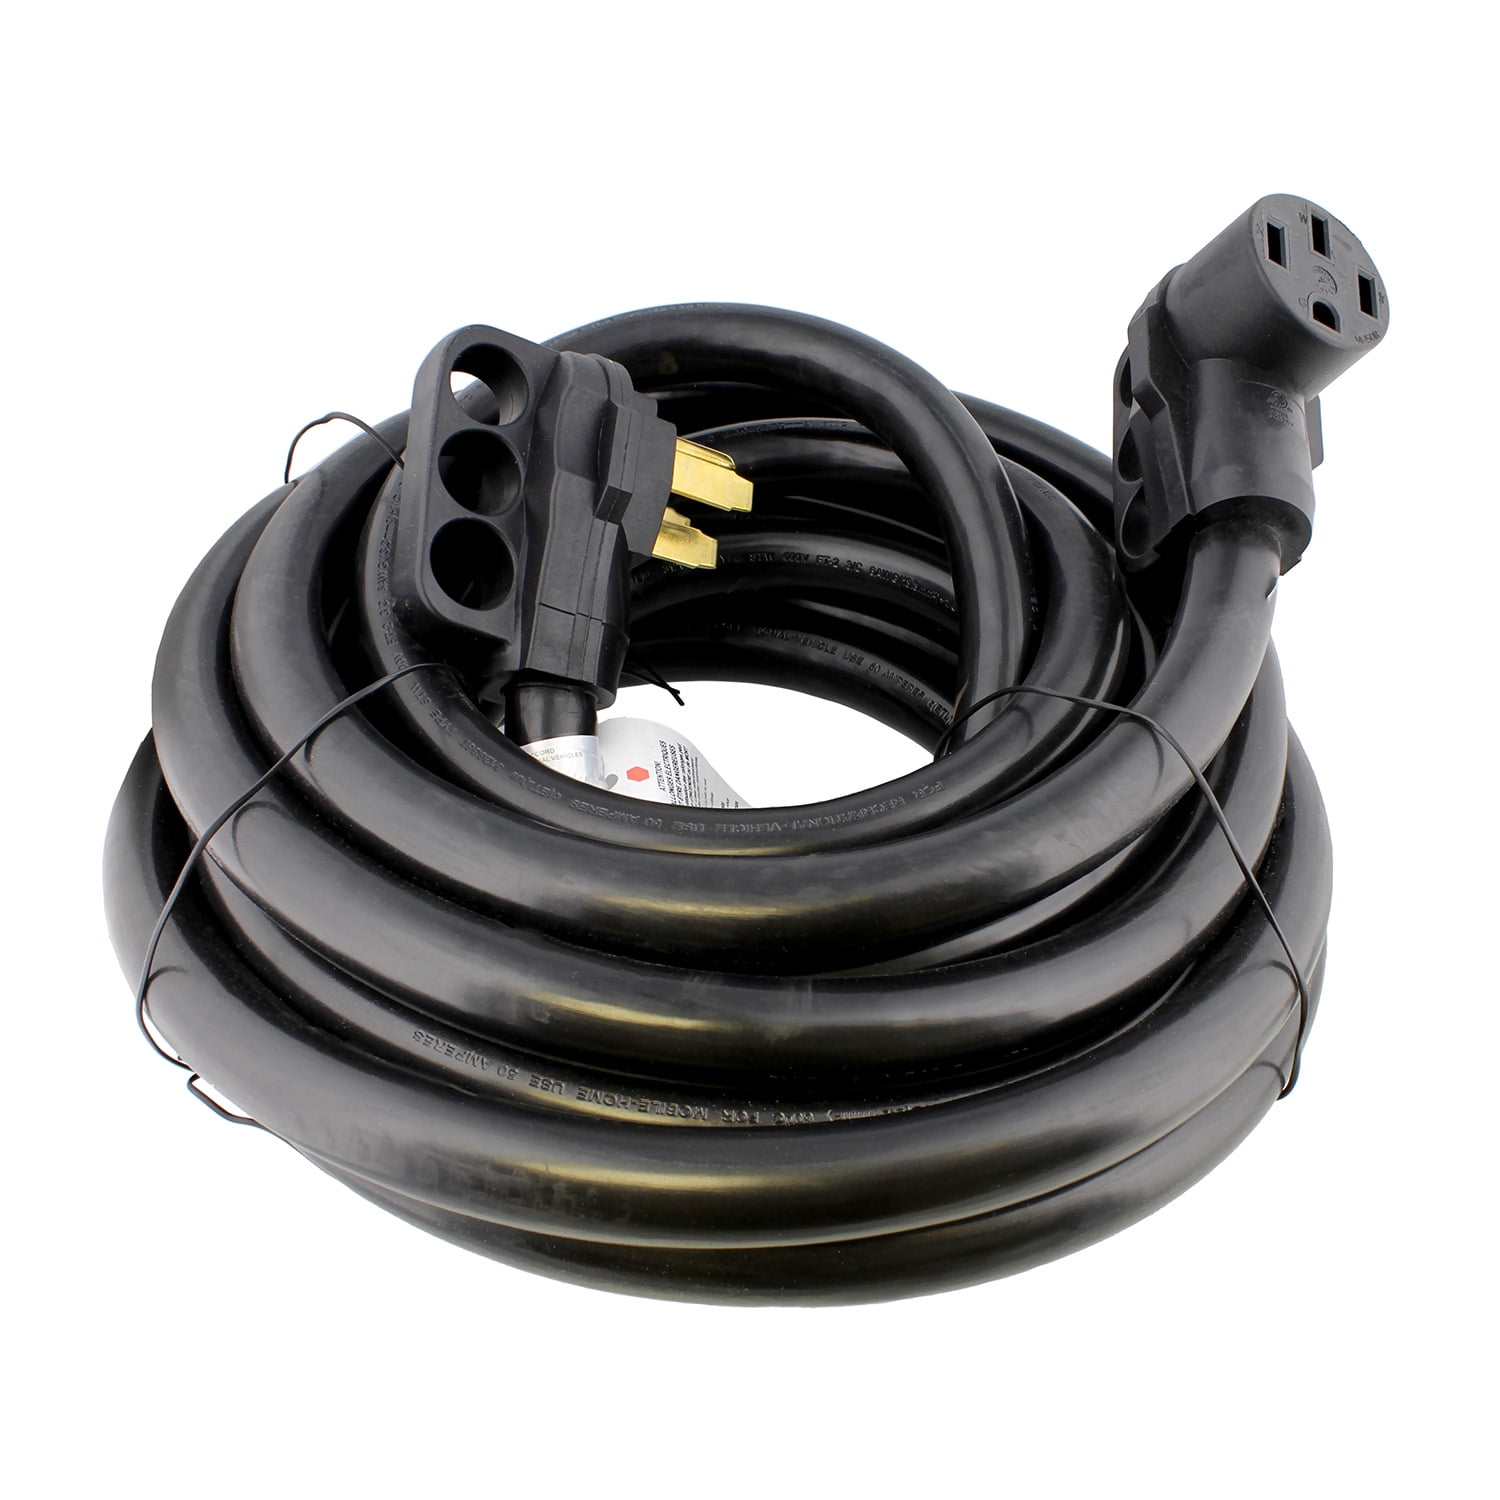 30 amp extension cord ends - sayown